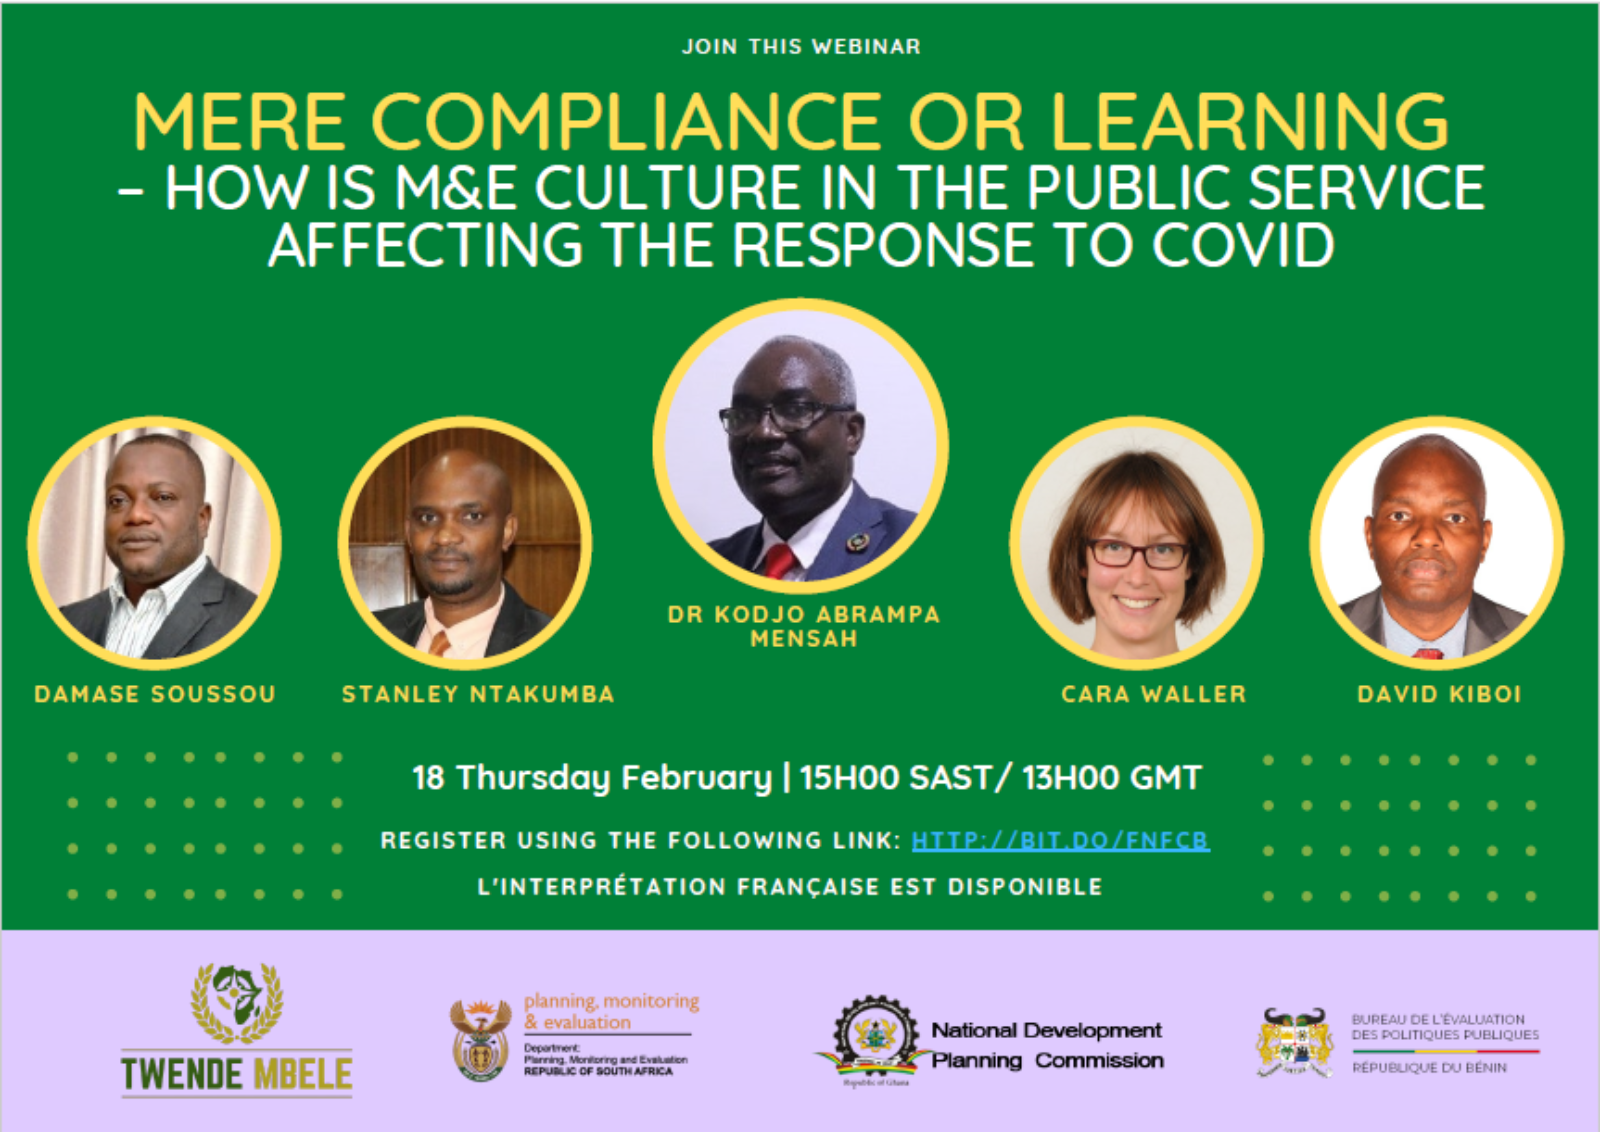 Mere compliance or learning – how is M&E culture in the public service affecting the response to COVID